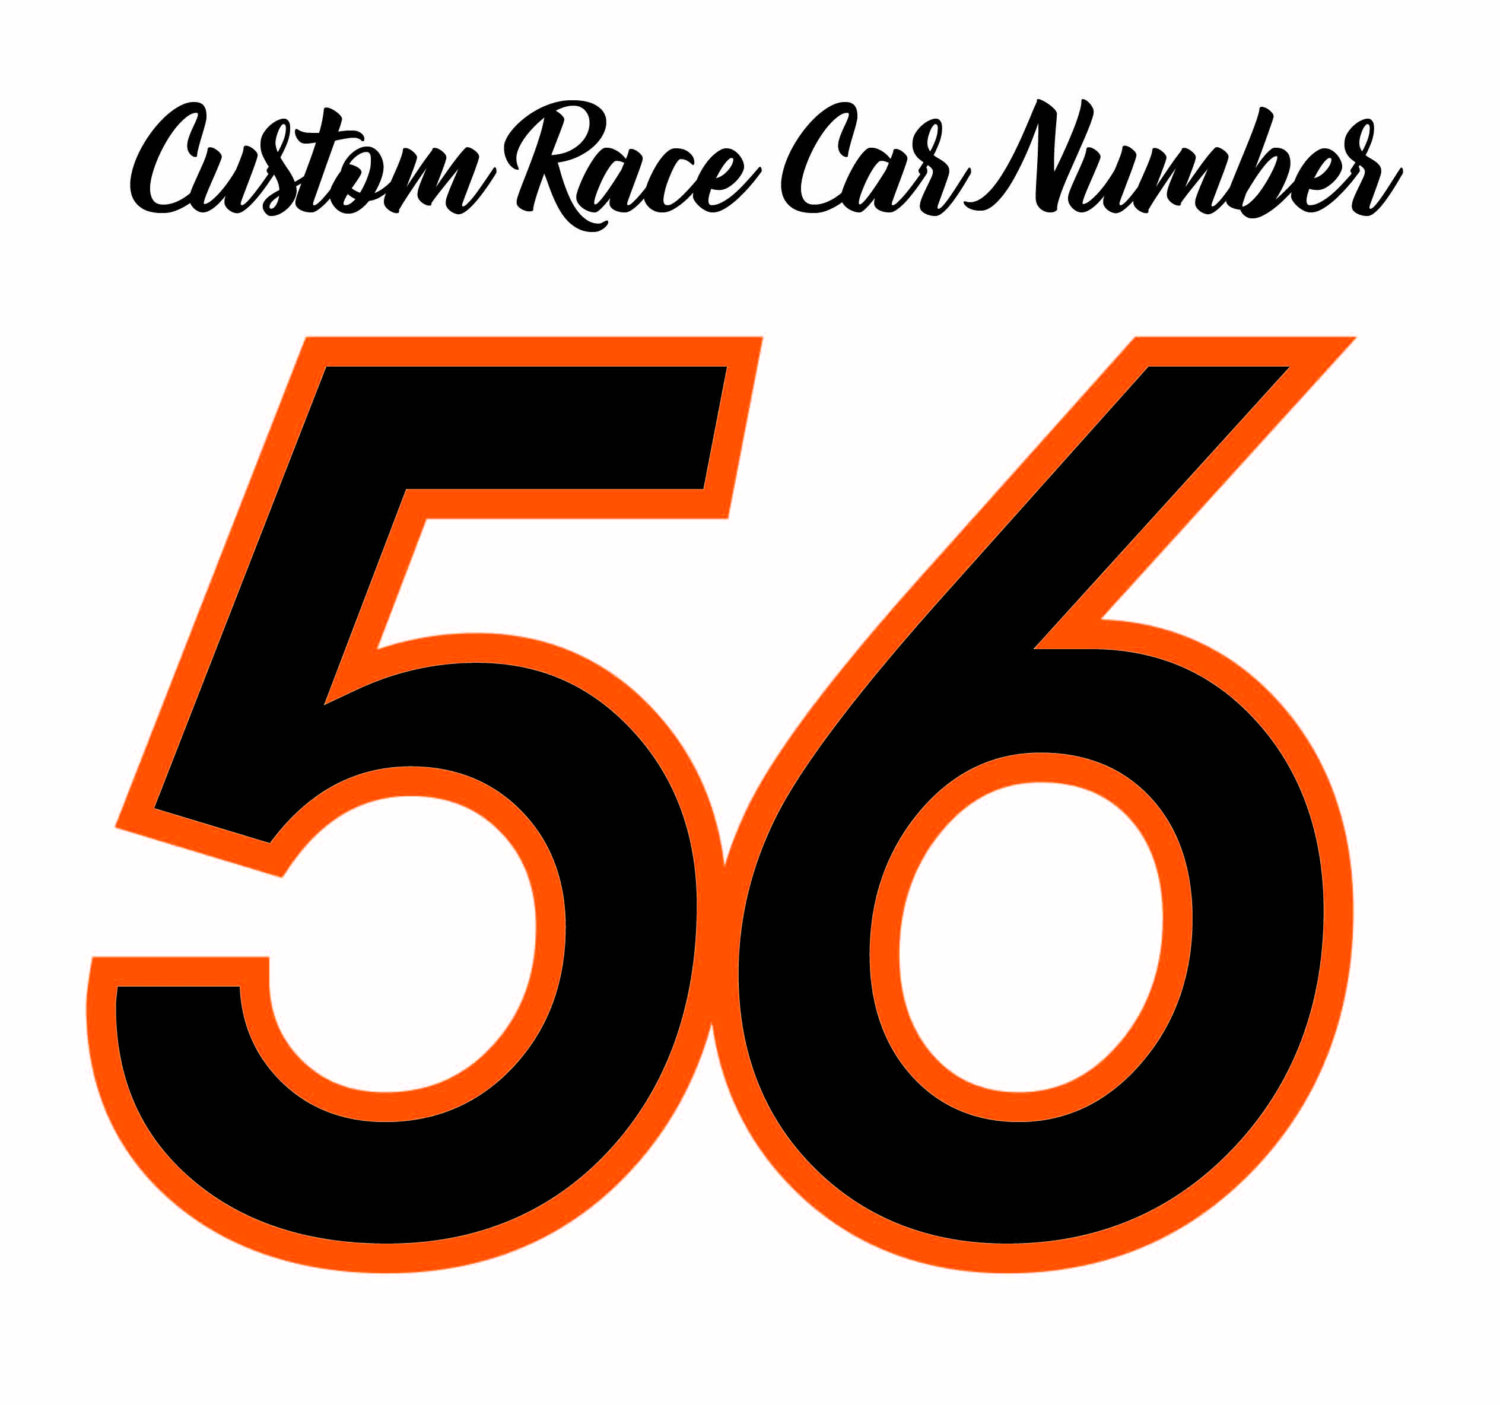 Flame Fade Race Car Numbers Decals Race Cars Dirt Late Models Racing Images